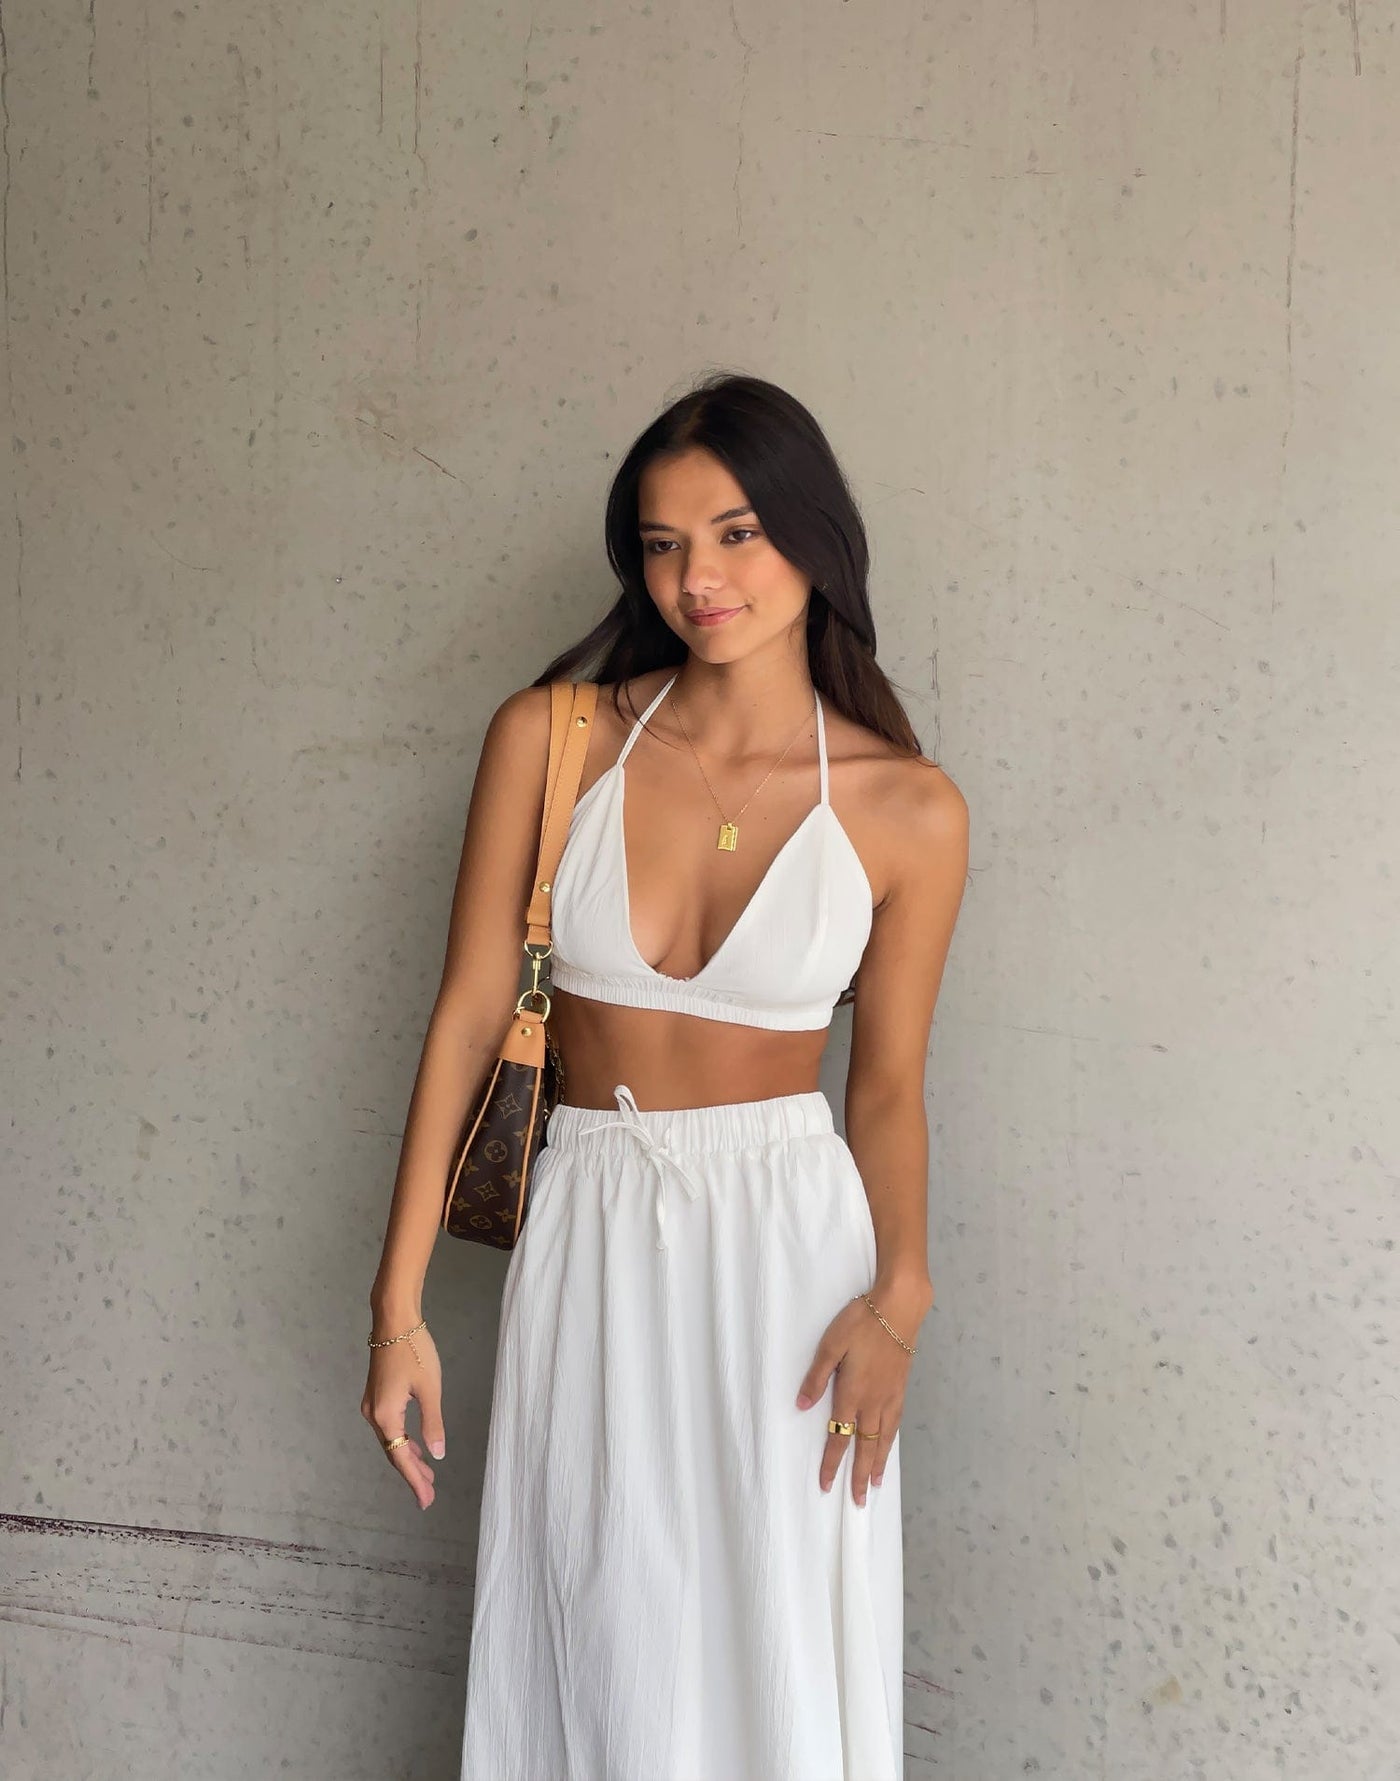 April Crop Top (White) - White Bralette Crop Top - Women's Top - Charcoal Clothing